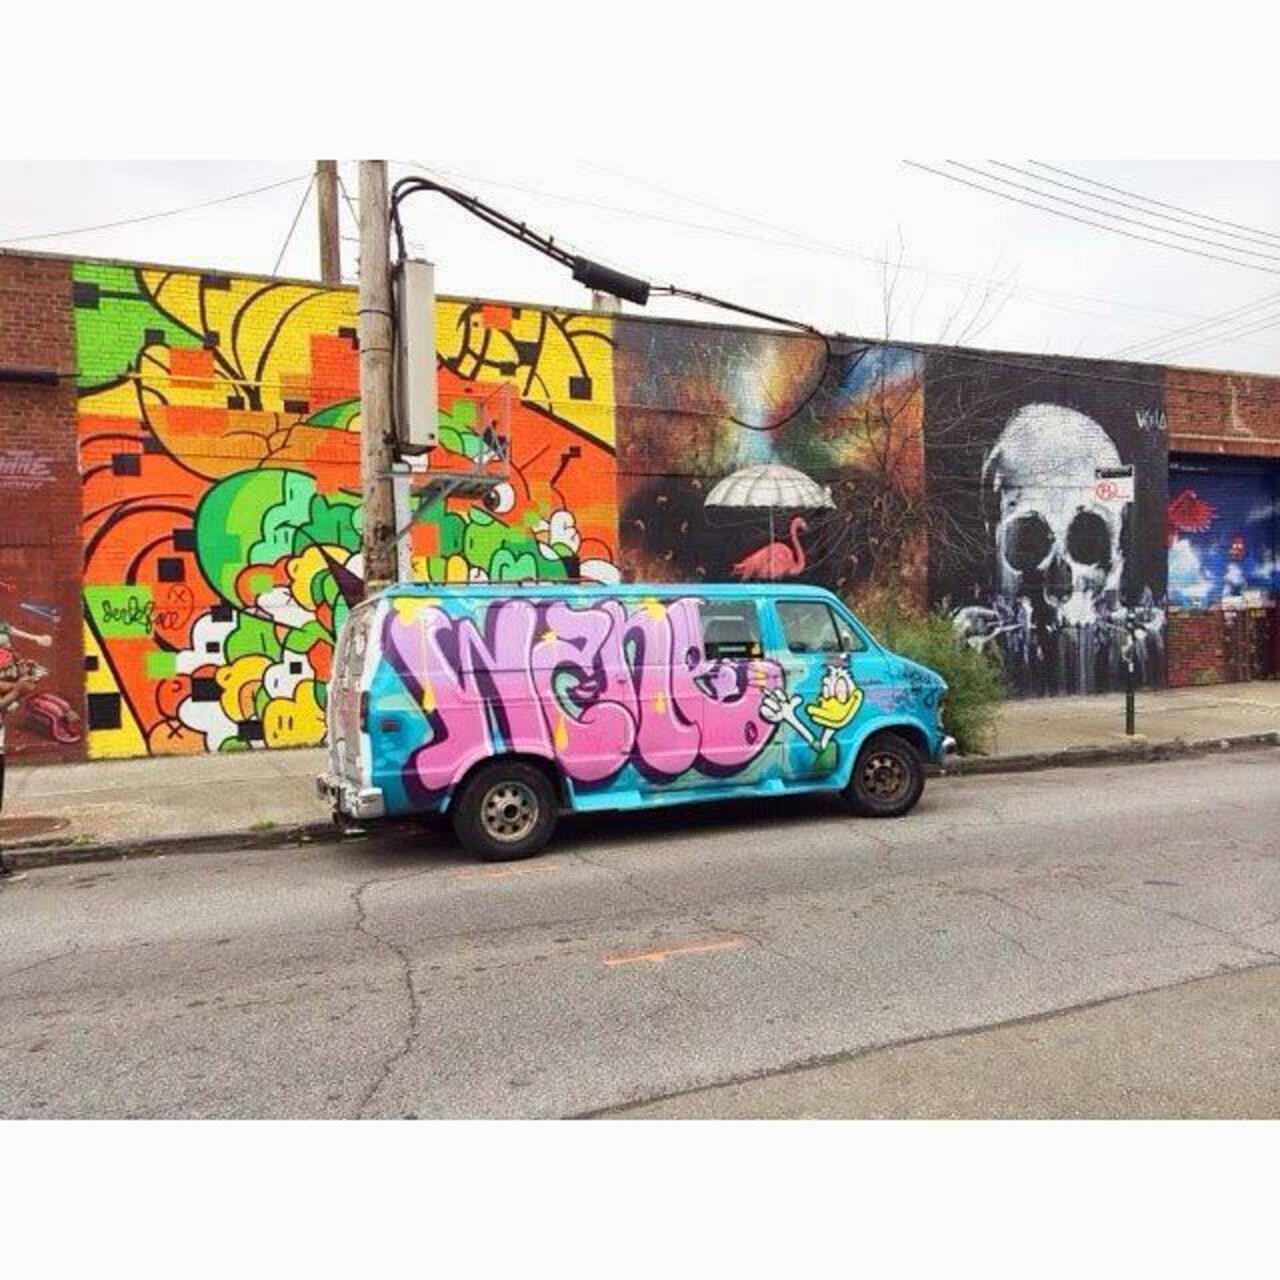 I saw this van in #brooklyn . Does anyone know of the #artist ? #streetart #graffiti http://t.co/fJ7vpmlANR